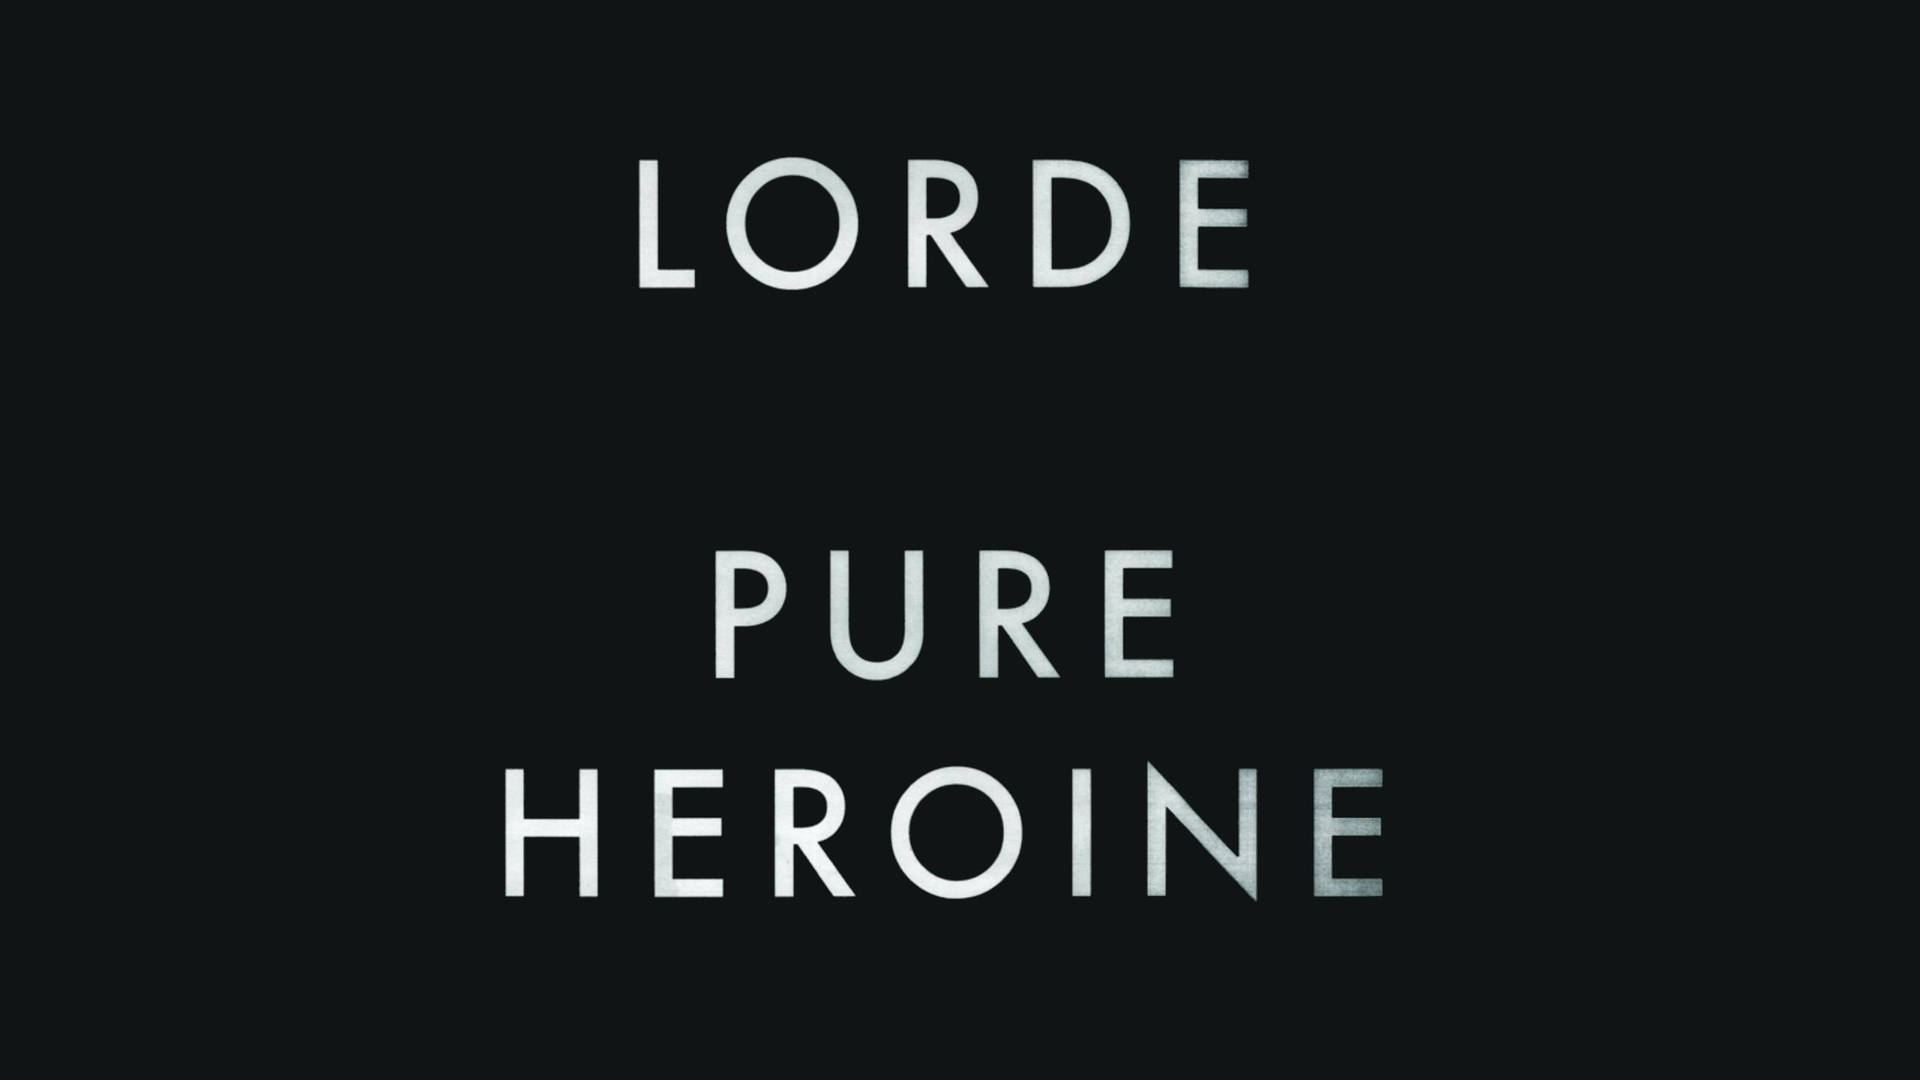 Lorde Pure Heroine Album Poster Background